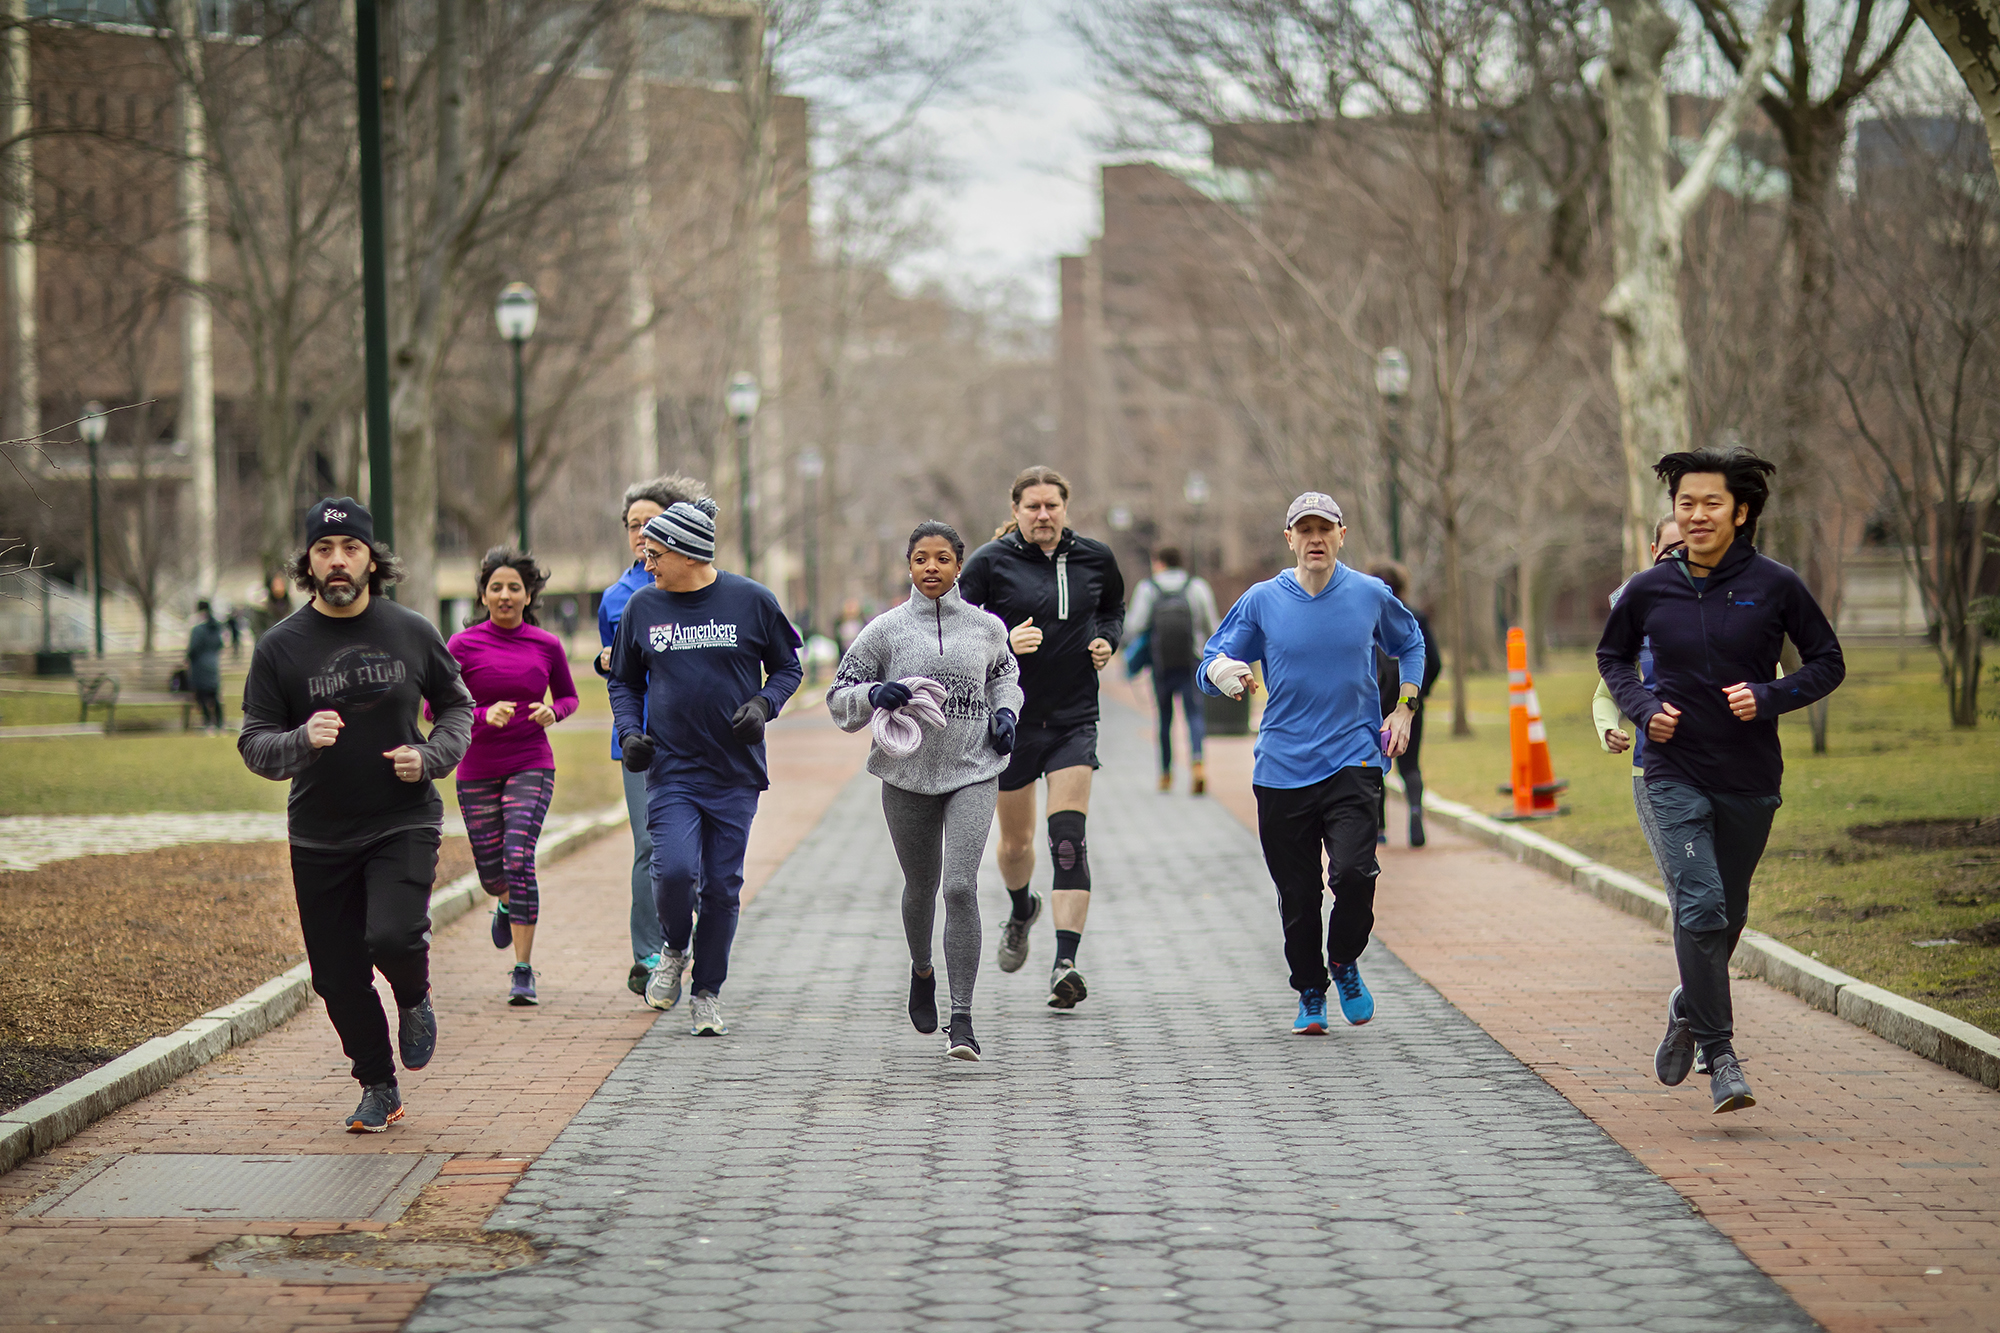 A group of runners makes their way down a wide path framed by trees and buildings.